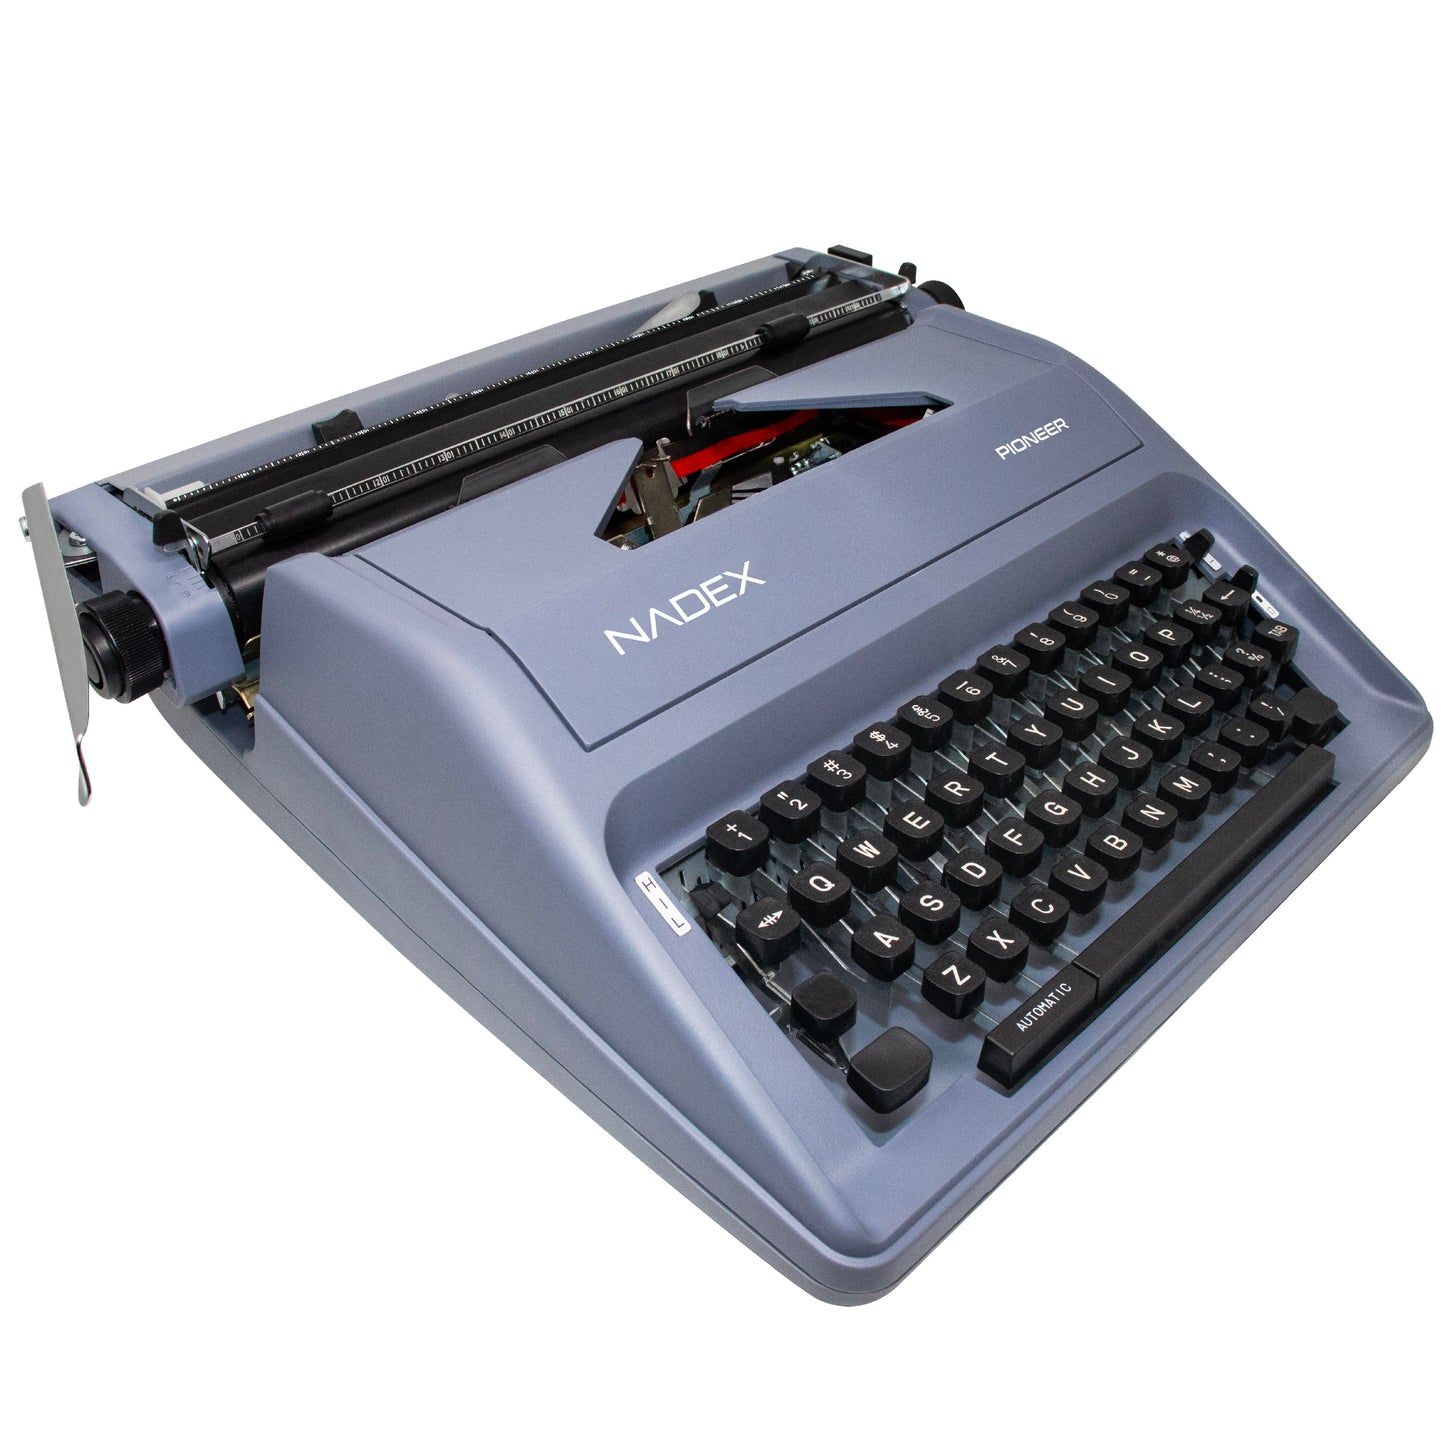 Nadex Pioneer Manual Typewriter, Durable Travel Case Included, Gray